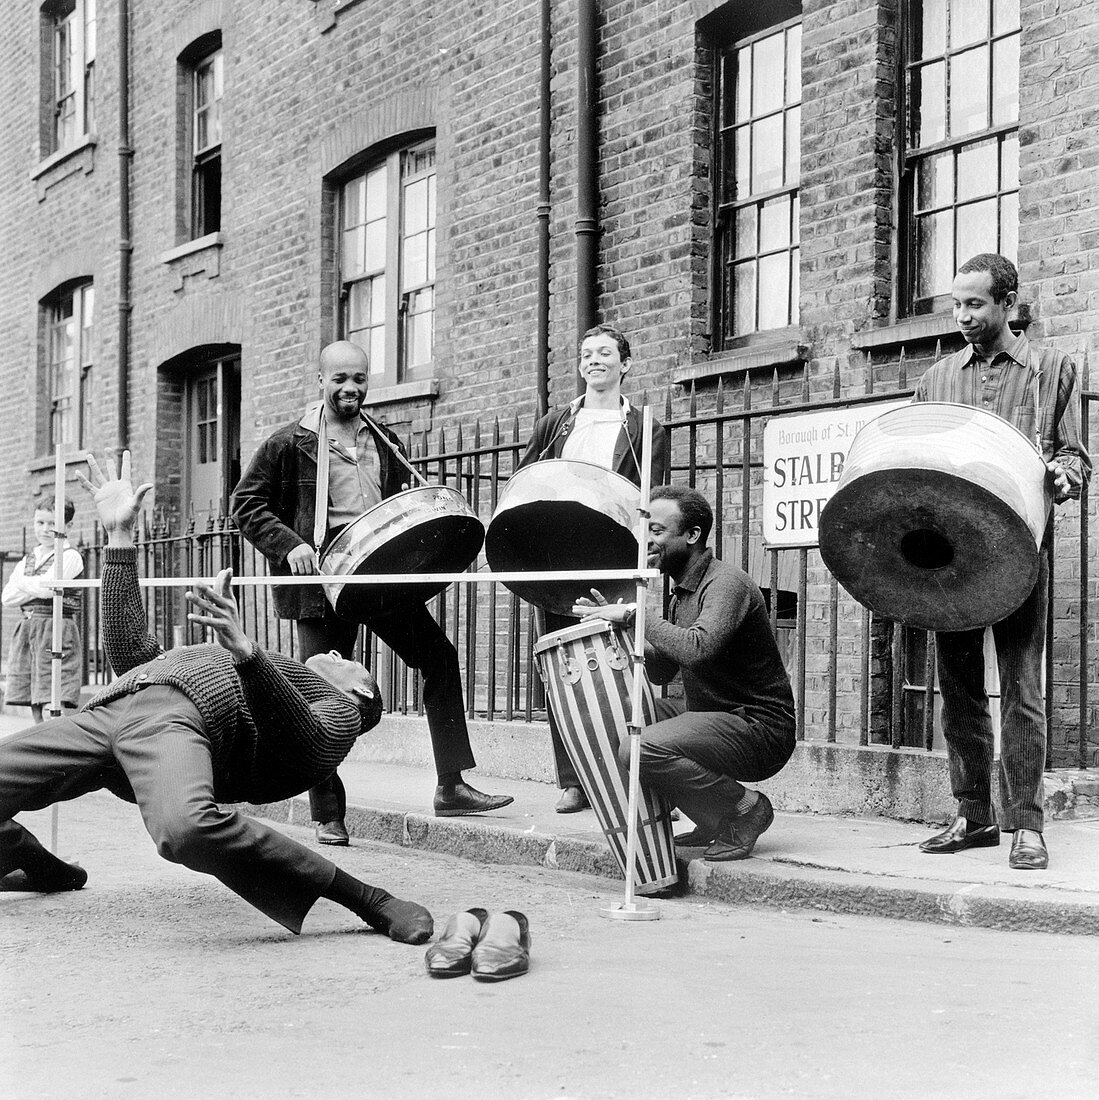 The Irwin Clement Caribbean steel band, London, 1963